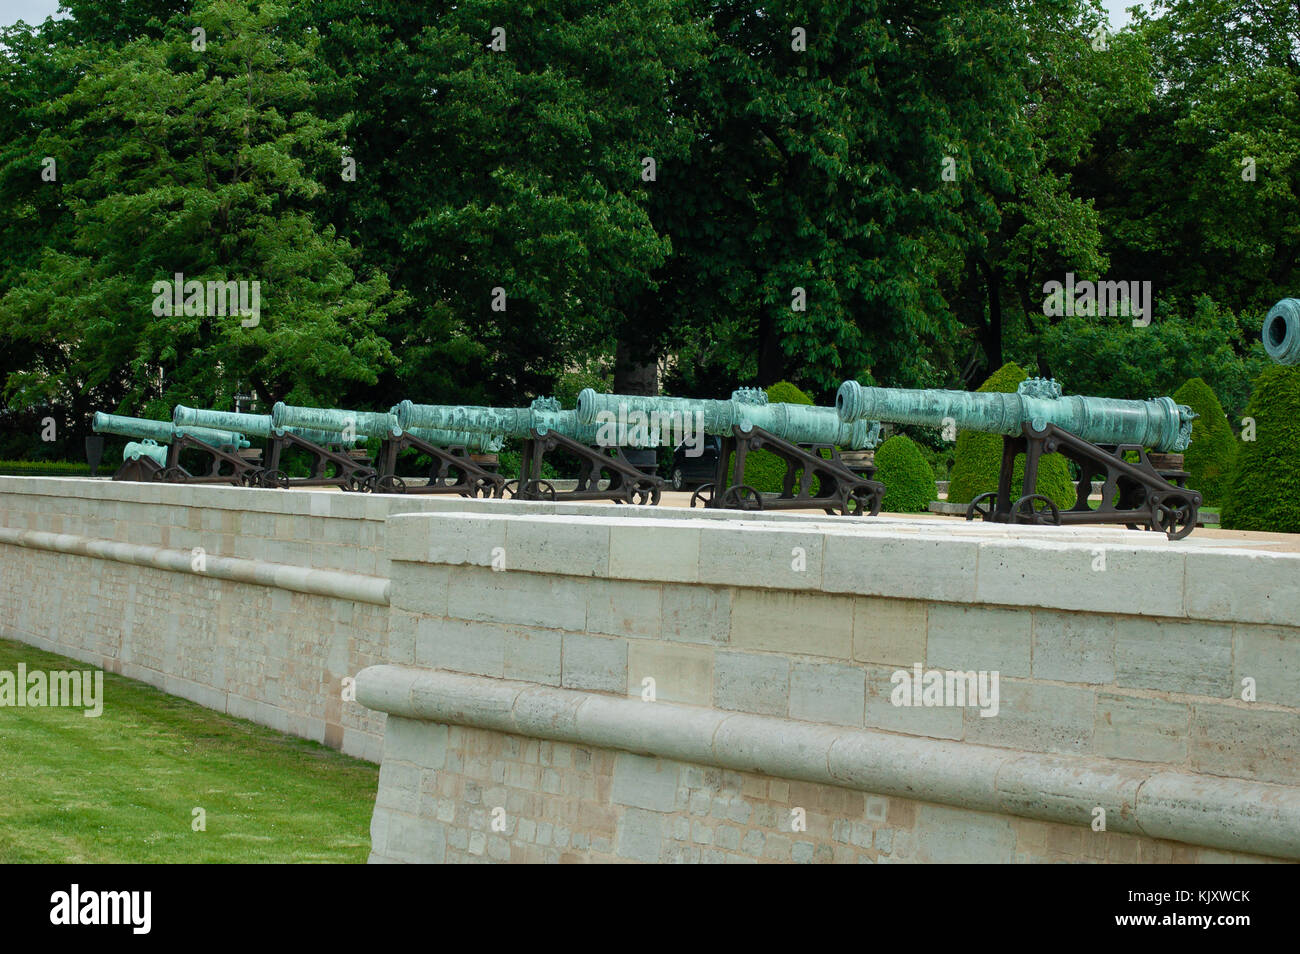 Row of historic ancient cannons forming the Triumphal Battery of the Hôtel Les Invalides museum in Paris France Stock Photo